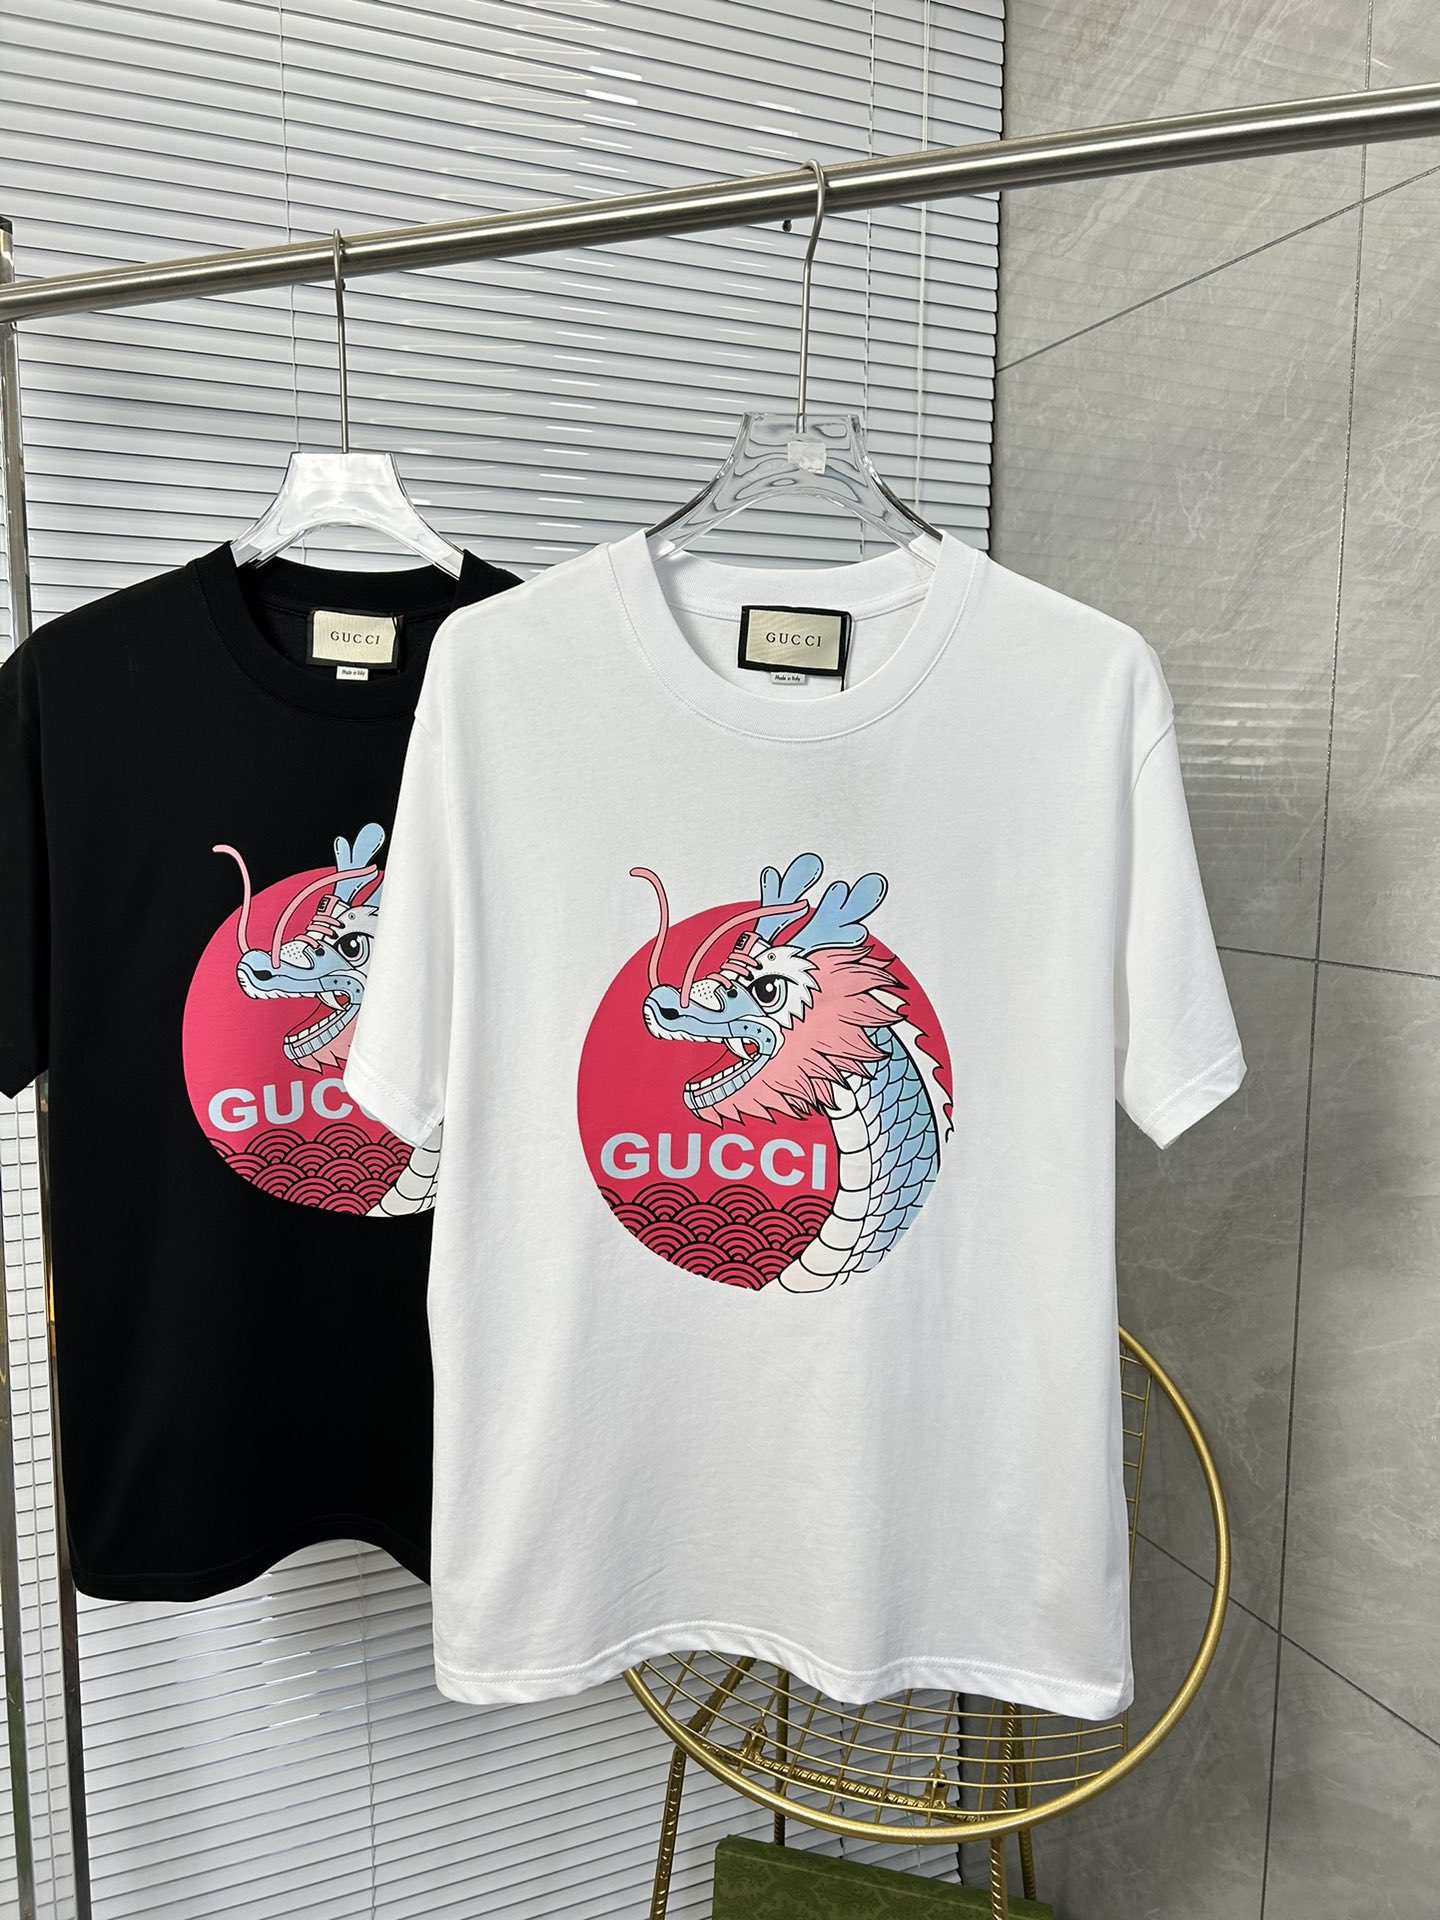 Gucci Clothing T-Shirt Black White Cotton Spring/Summer Collection Fashion Short Sleeve